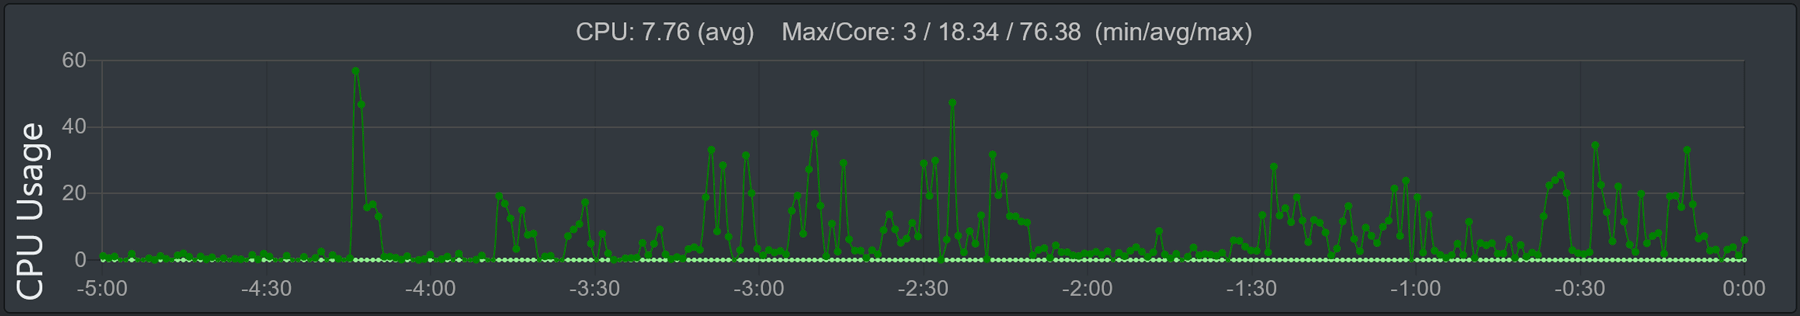 Image of the 'CPU Usage' graph